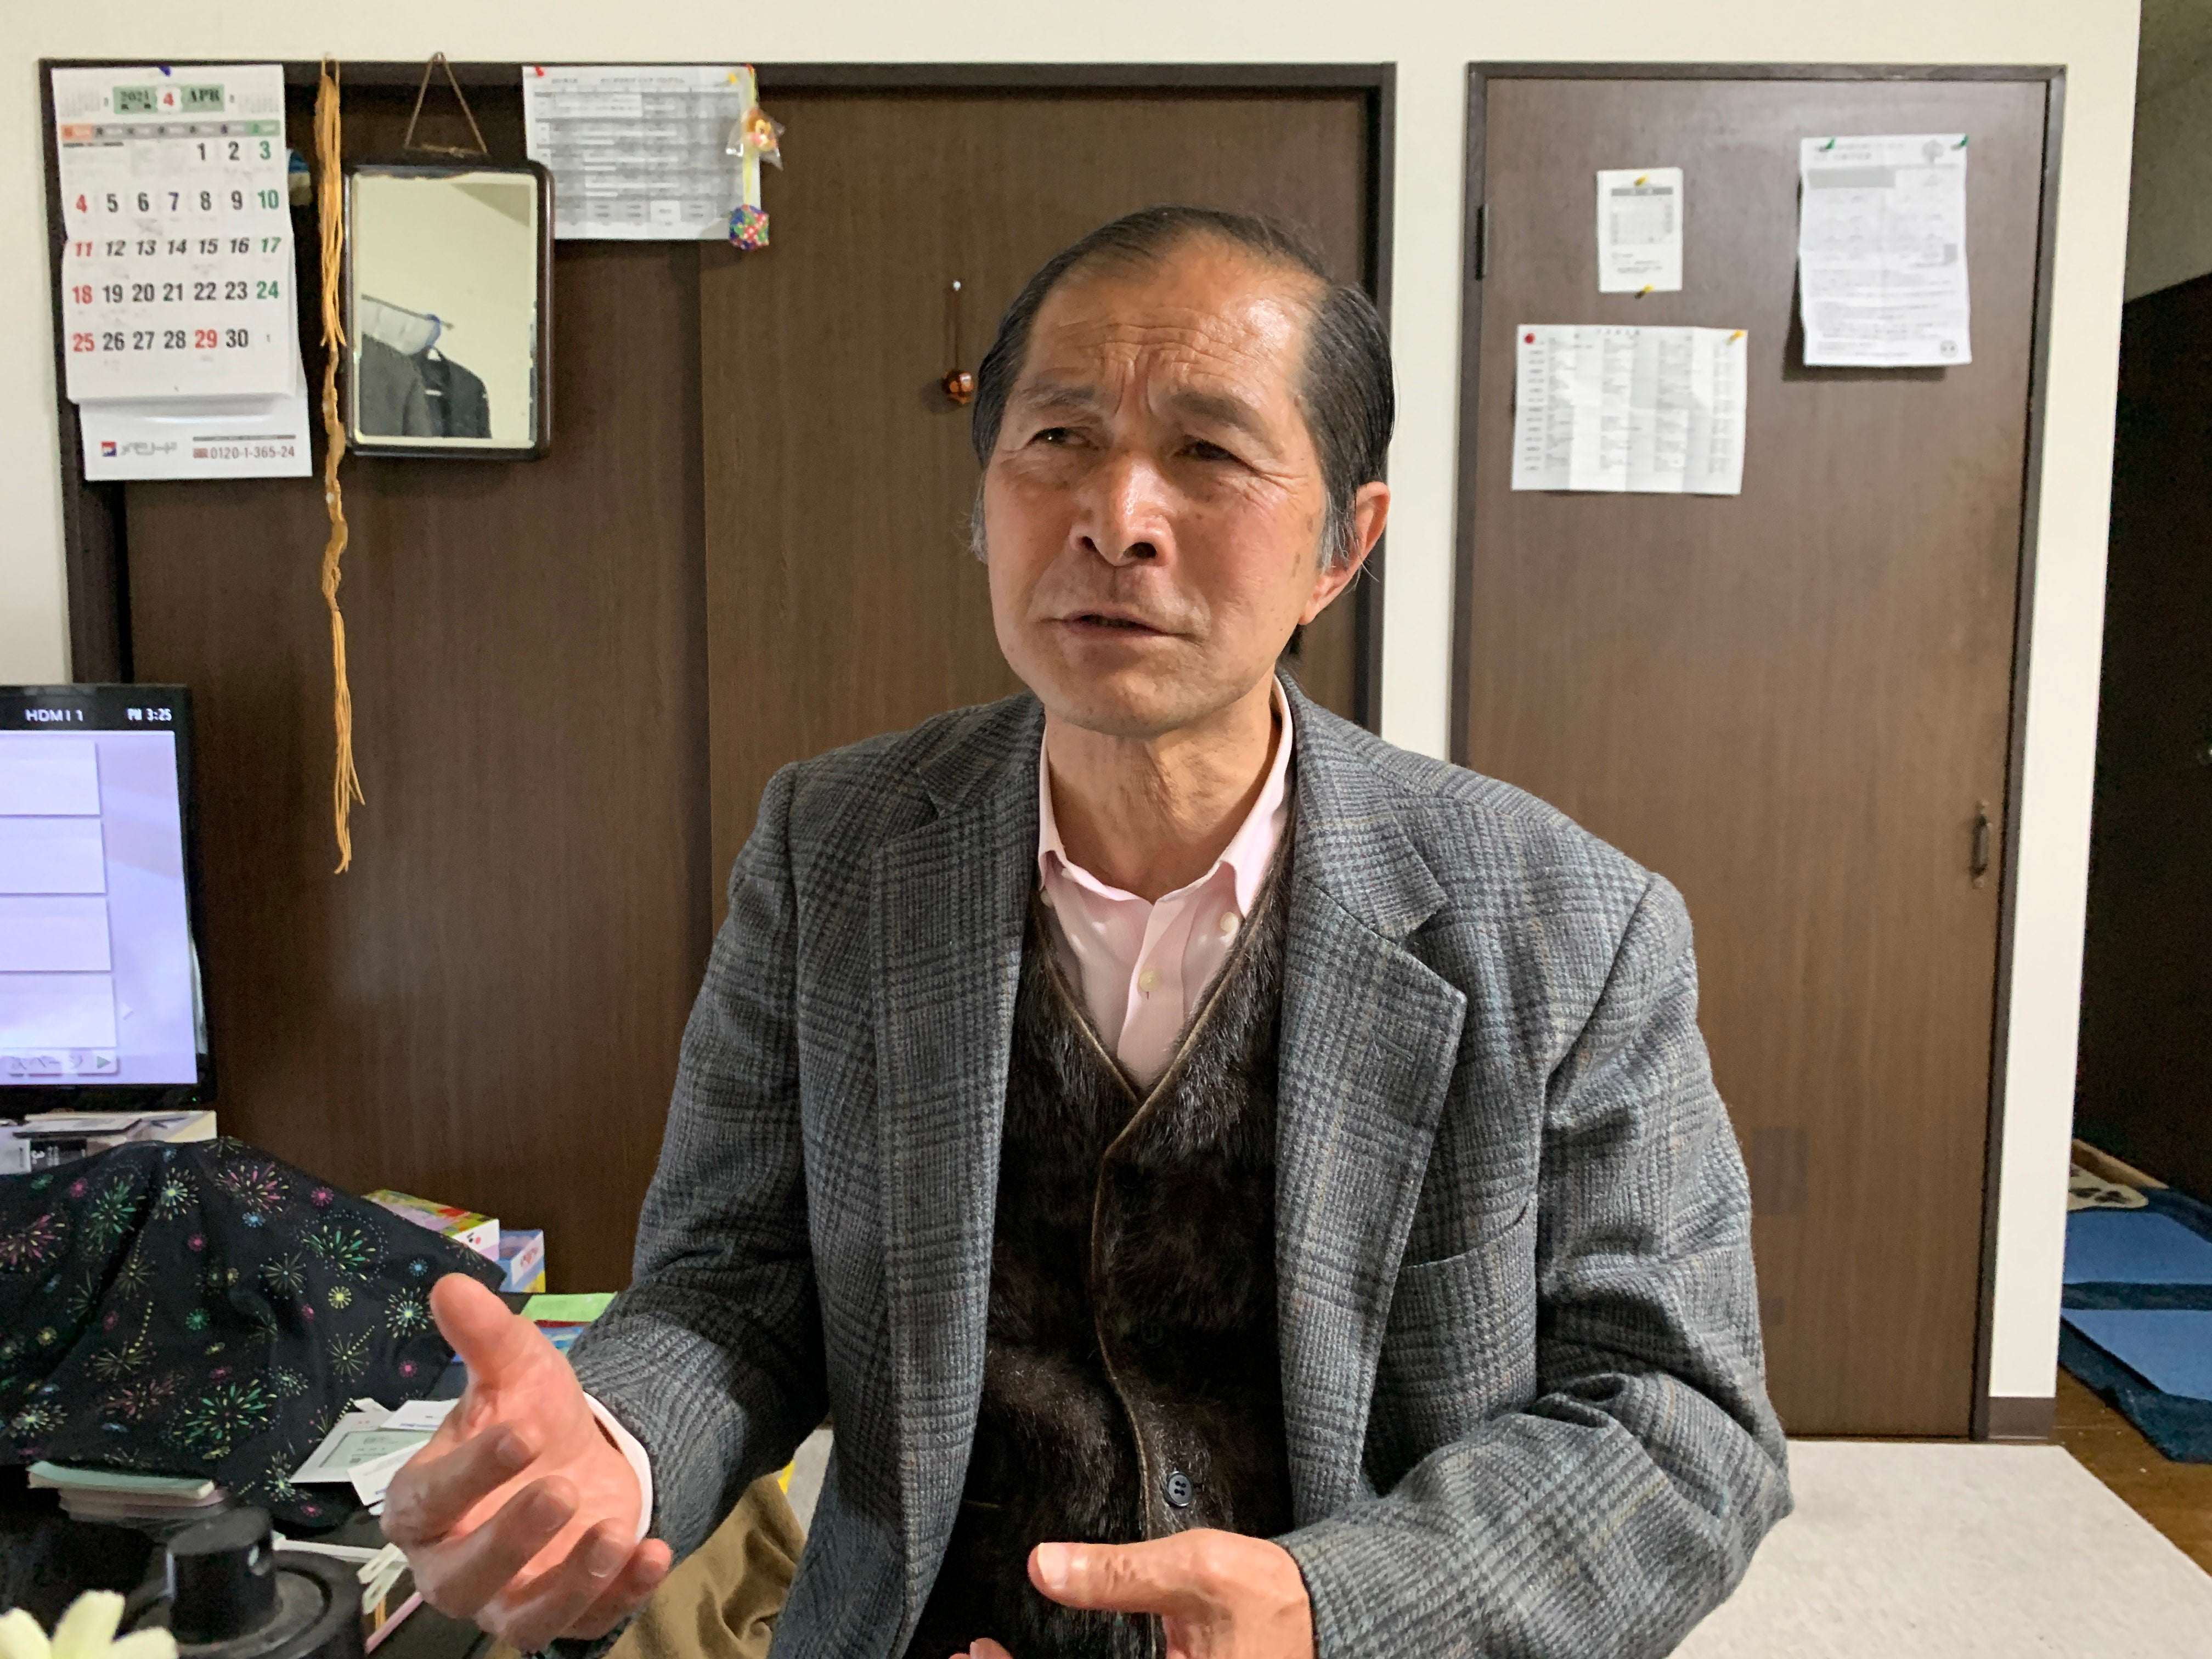 Tokio Ito, 70, says his 45 years in an institution was ‘beyond loneliness’